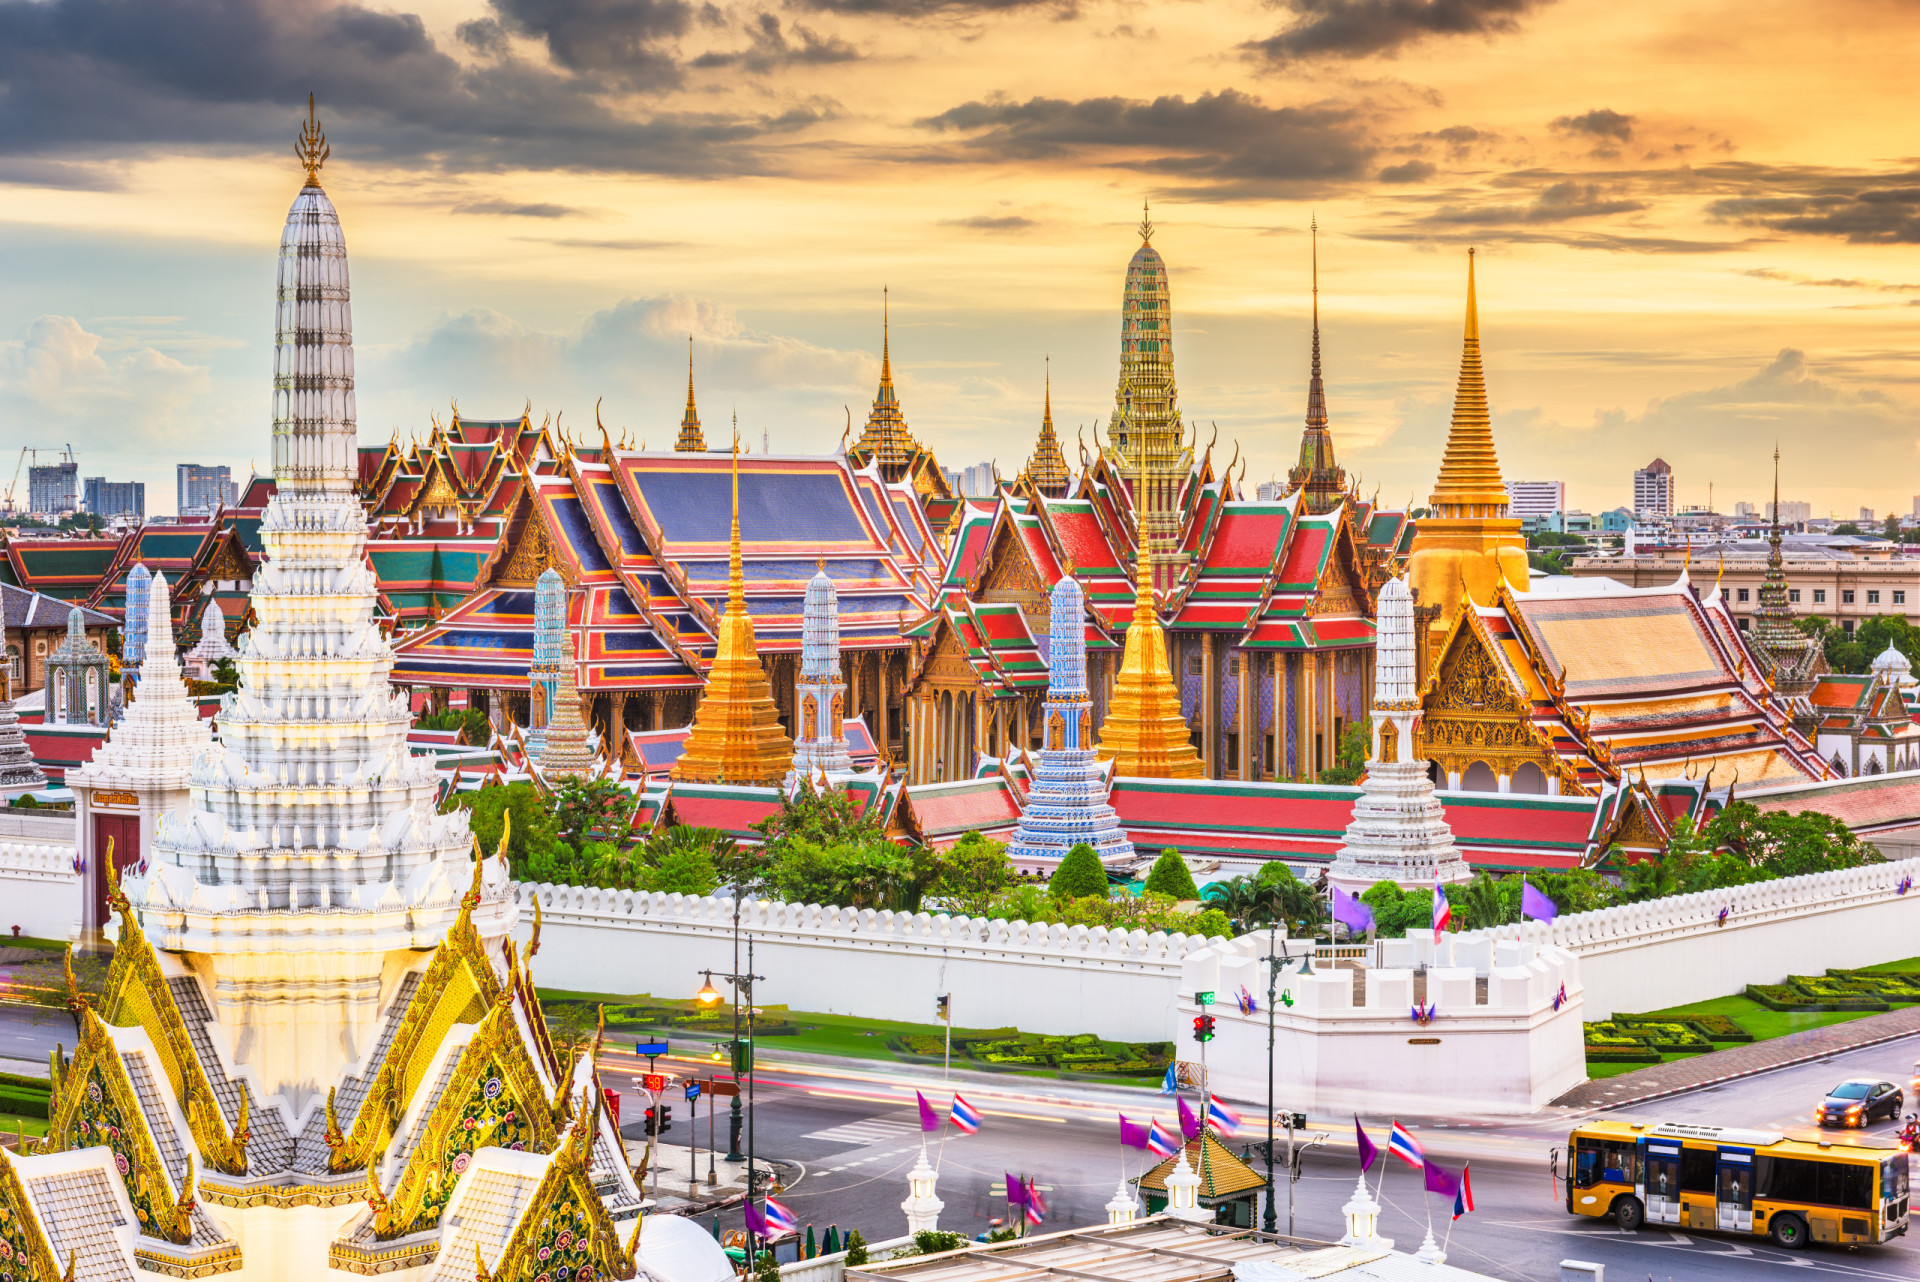 <p>For those seeking big city excitement, Bangkok is hard to beat. The city's nightlife is notoriously heady, but Bangkok is also becoming known as a center of wellness and as an "emerging self-care" destination, according to luxury travel network Virtuoso.</p><p>You may also like:<a href="https://www.starsinsider.com/n/455155?utm_source=msn.com&utm_medium=display&utm_campaign=referral_description&utm_content=636762en-en_selected"> Horoscopes 2021: Astrological predictions for the New Year</a></p>